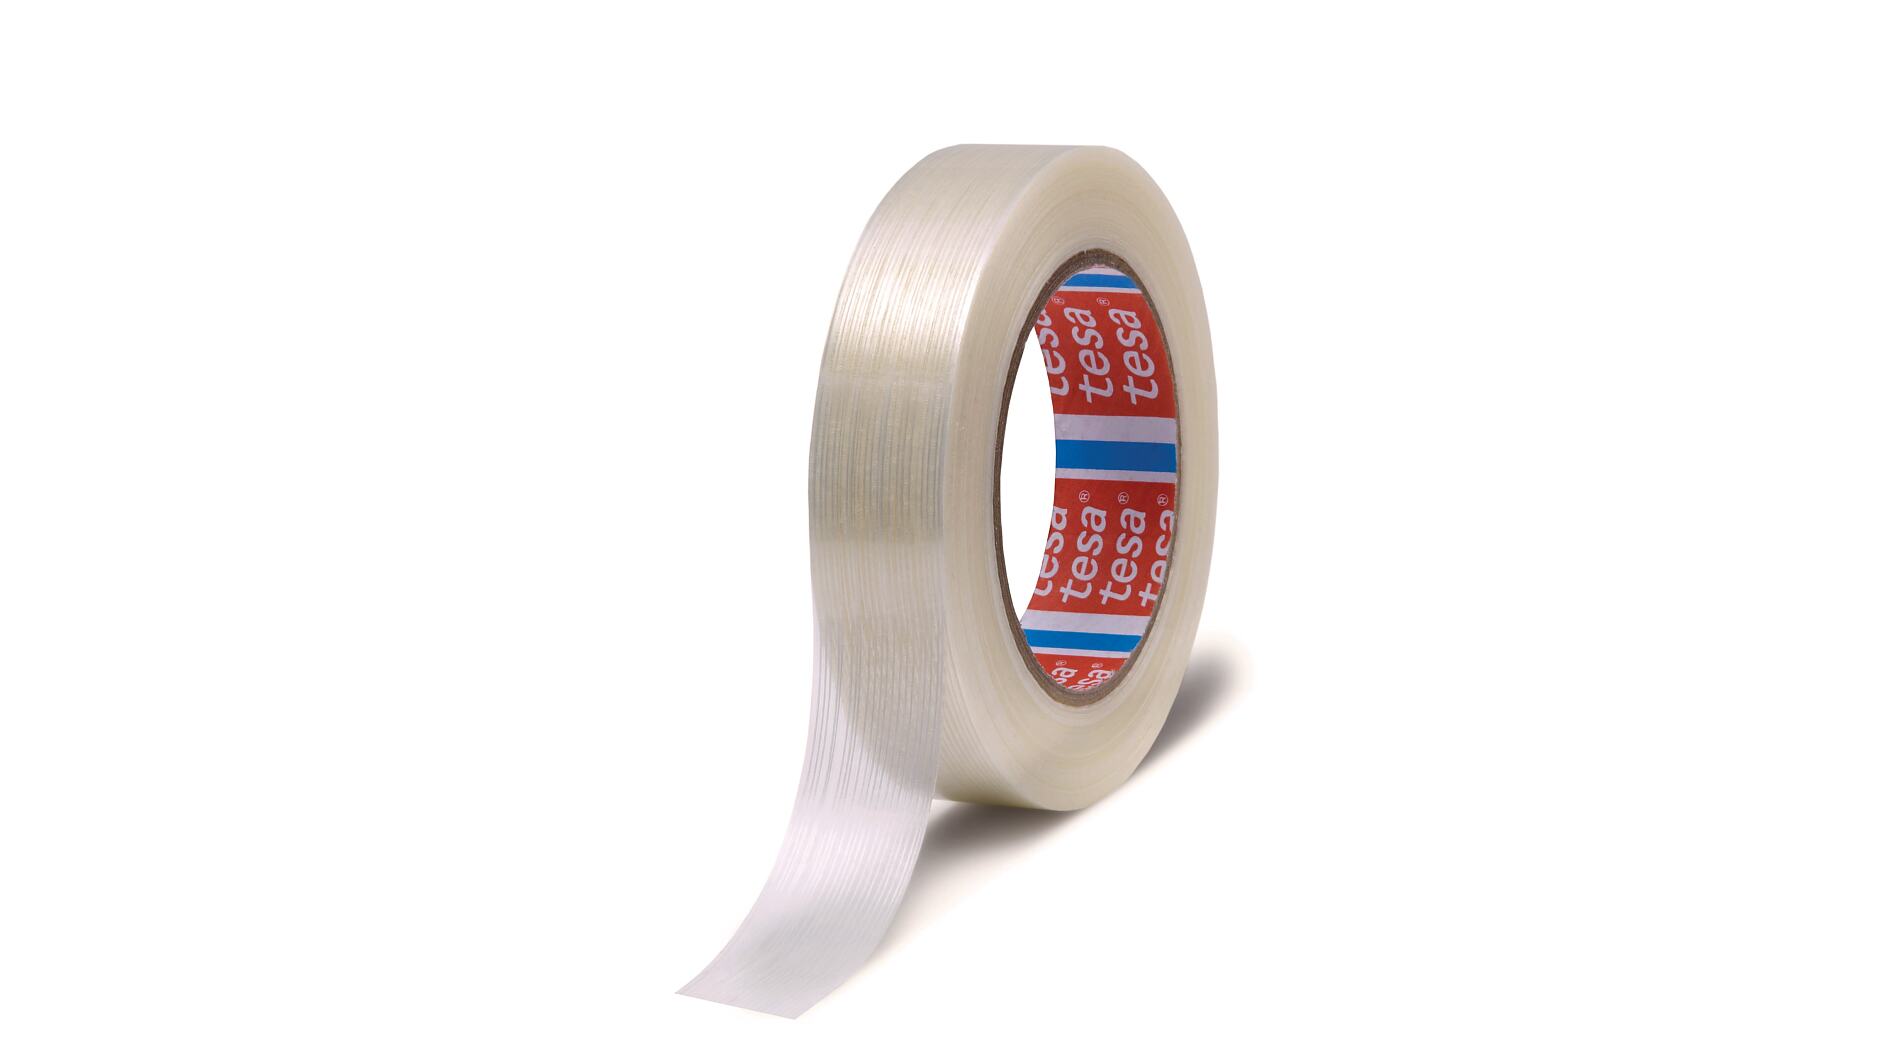 Gaffer Power Clear Filament Duct Tape, Heavy Duty Waterproof Strapping  Tape for Repairs, Sealing, Shipping, Packing, Residential, Commercial and  Industrial Uses